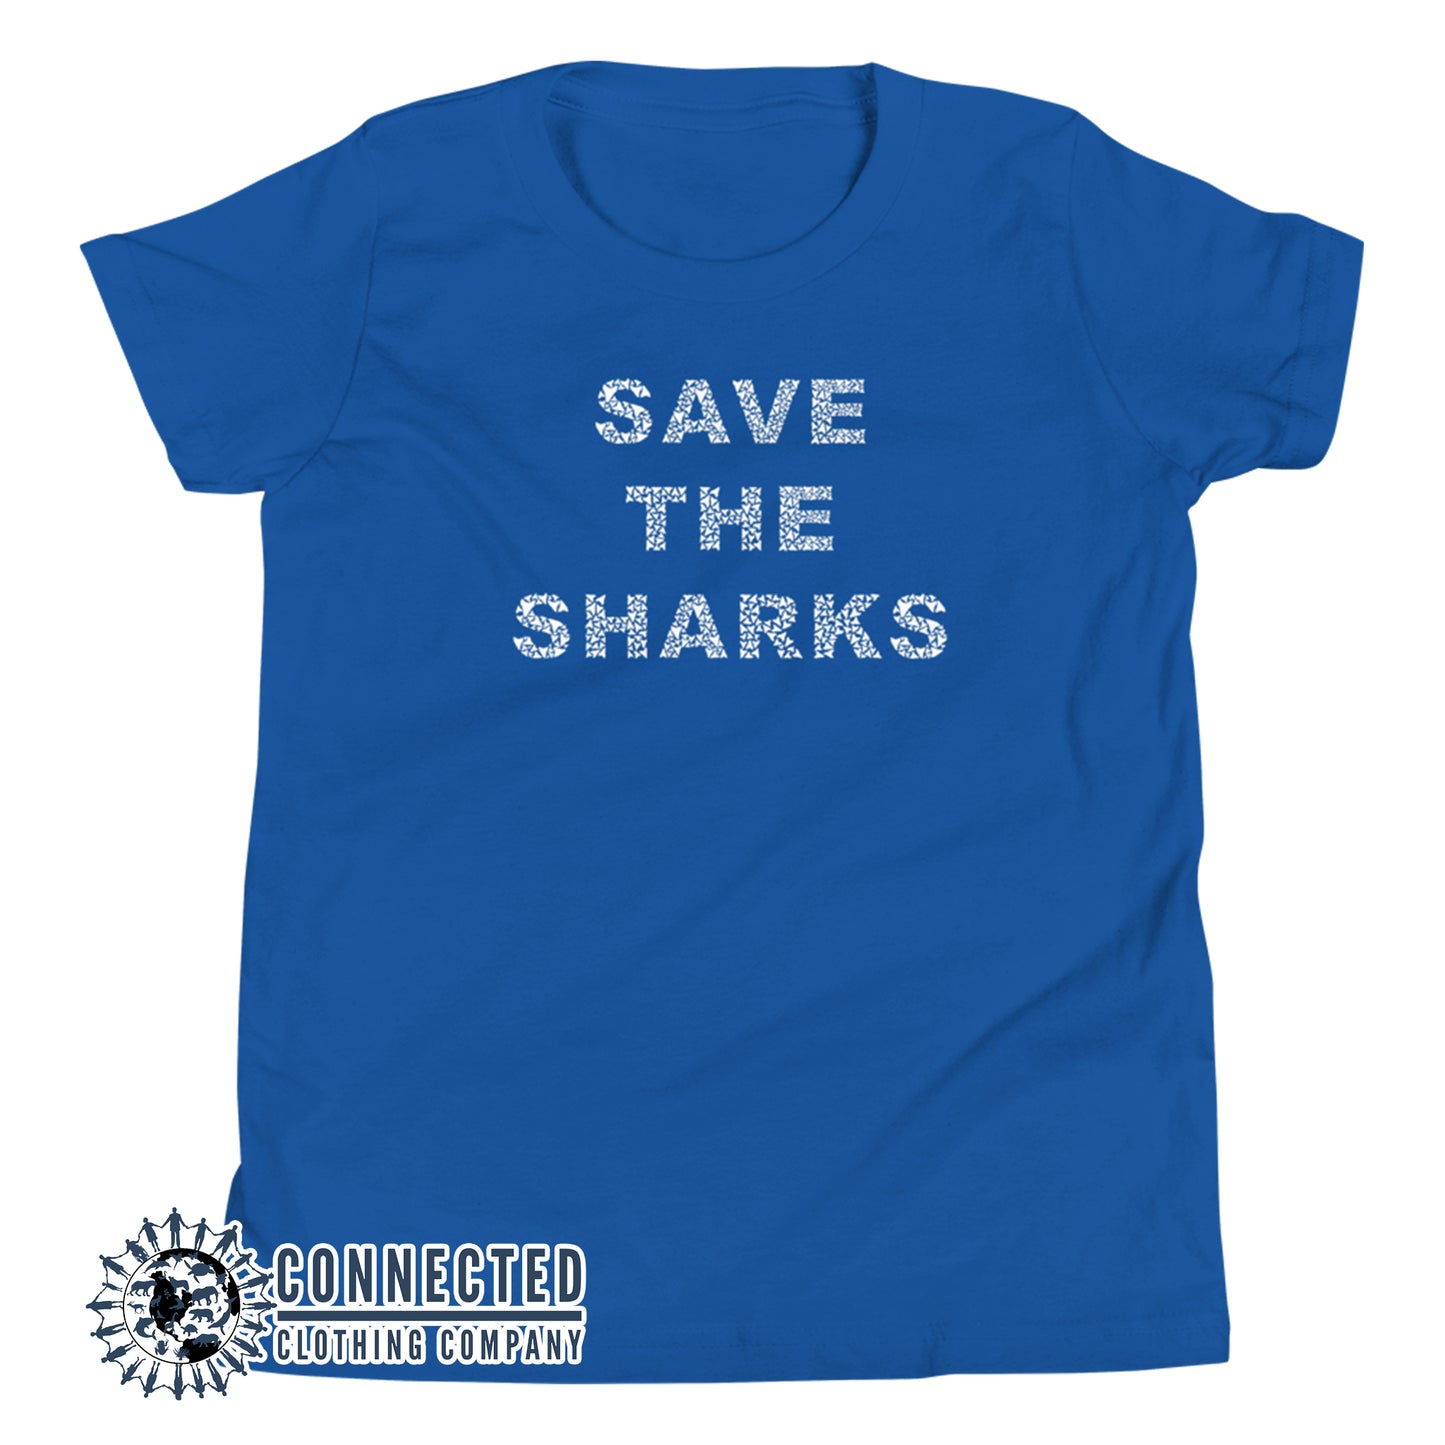 True Royal Blue Save The Sharks Youth Short-Sleeve Tee - Connected Clothing Company - 10% of profits donated to Oceana shark conservation